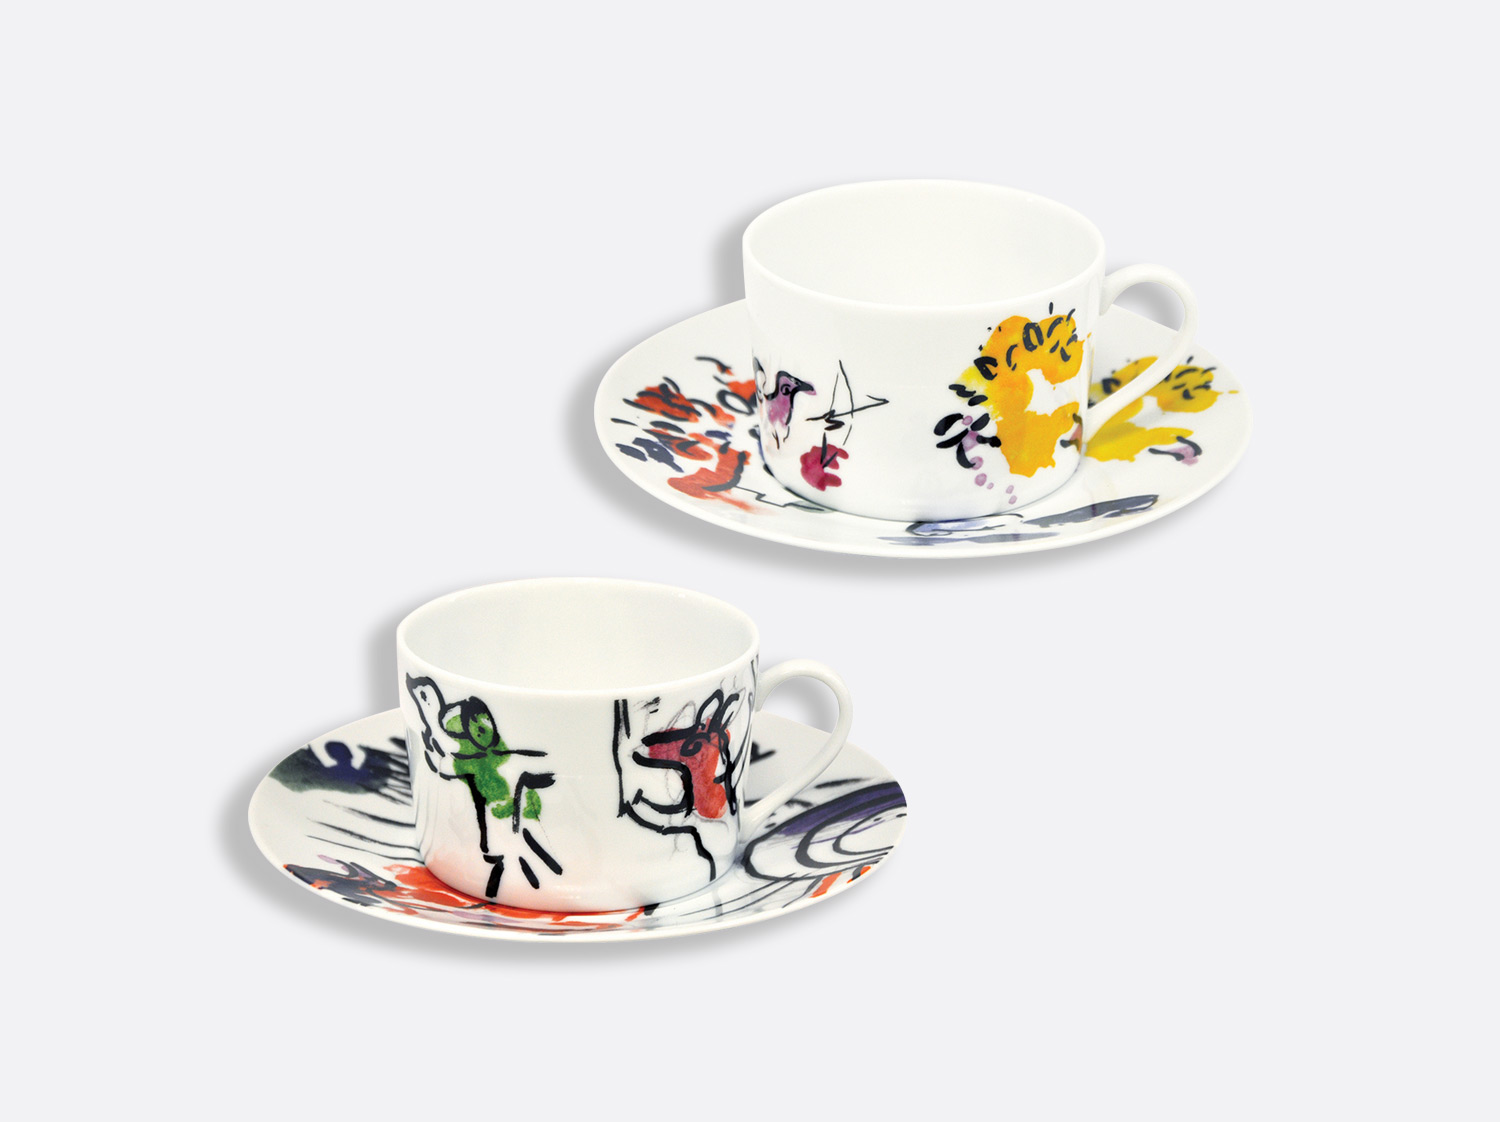 China Breakfast cup & saucer - set of 2 -  "joseph tribe" of the collection Les vitraux d'hadassah | Bernardaud